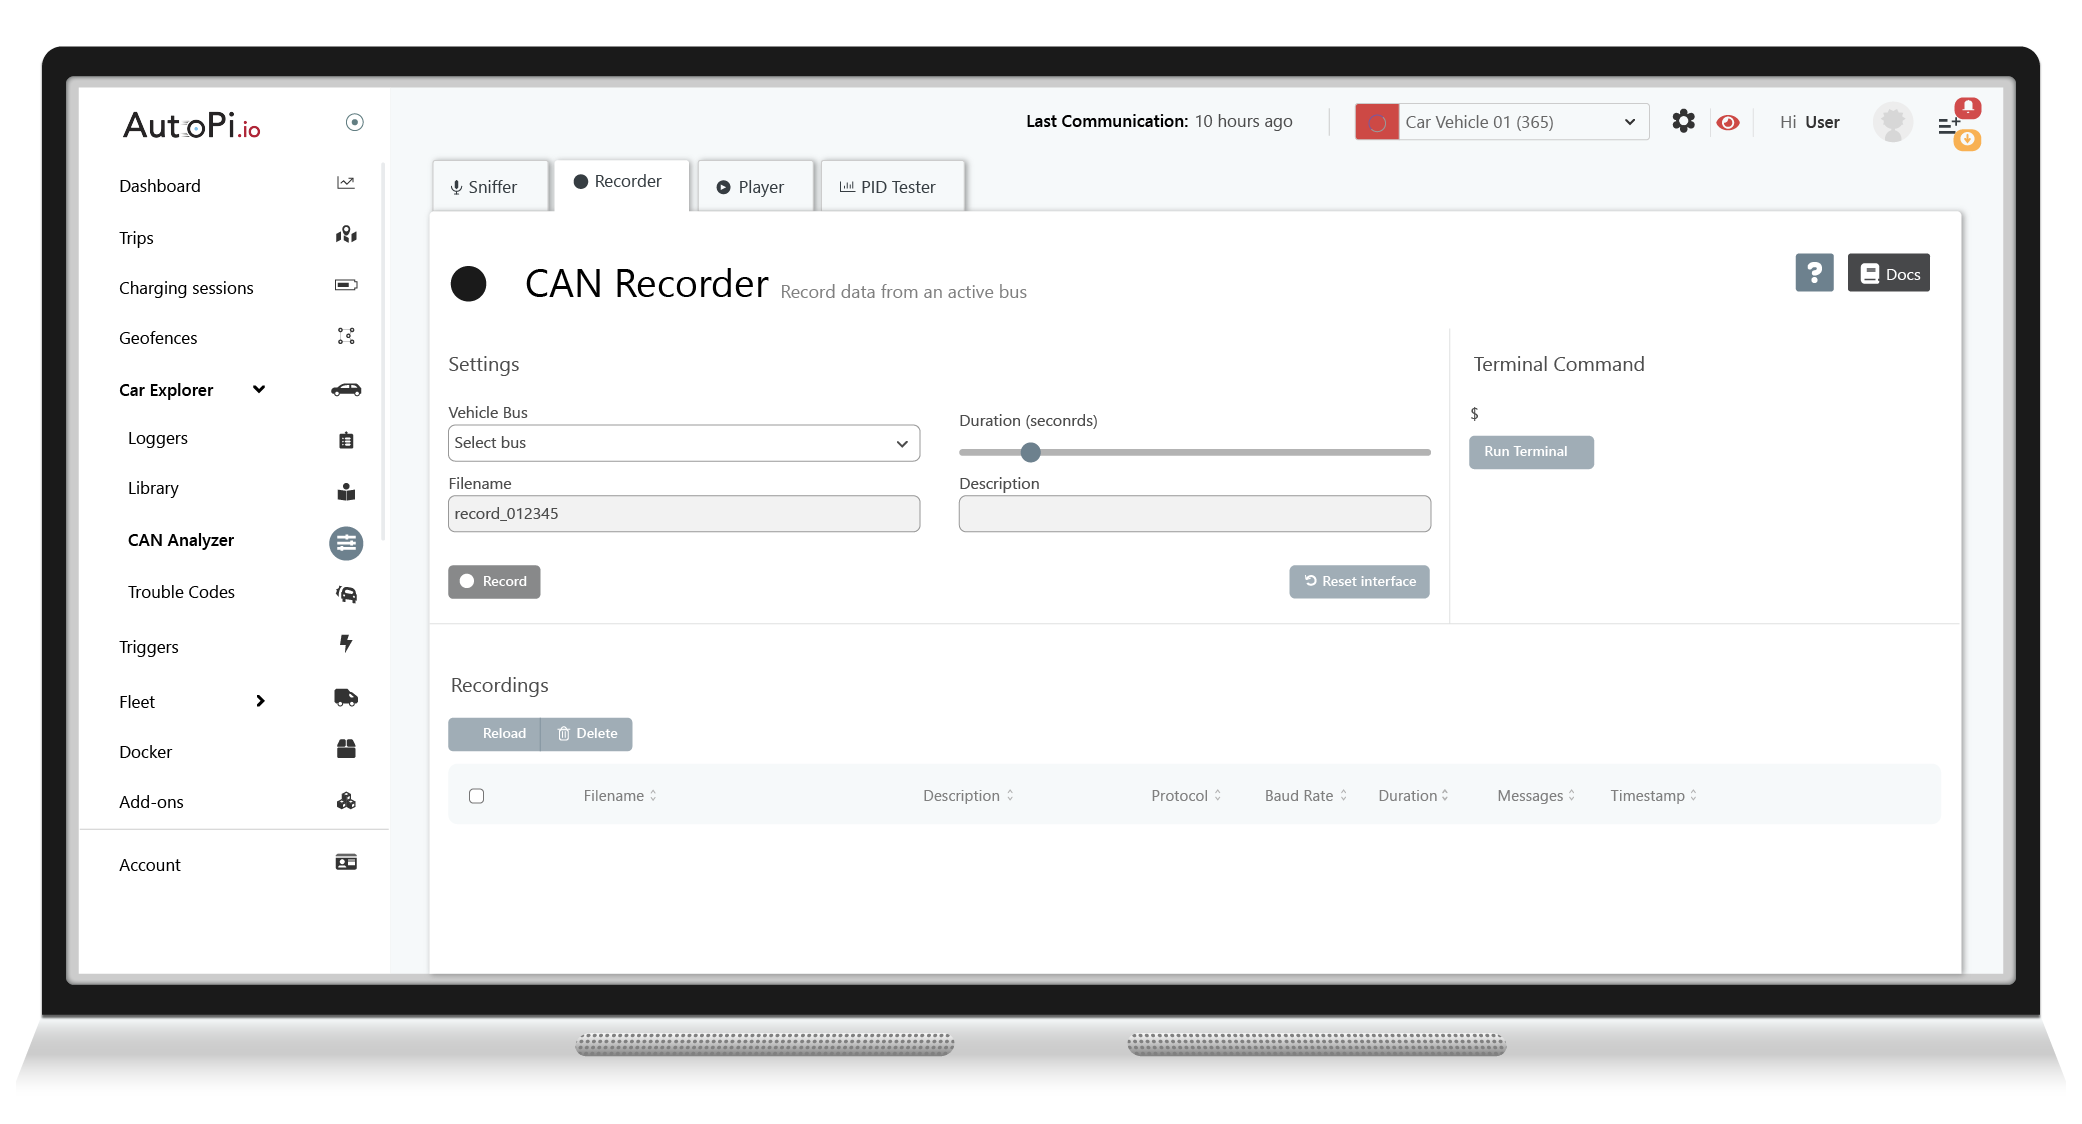 Intuitive user interface of AutoPi Cloud to discover new CAN commands